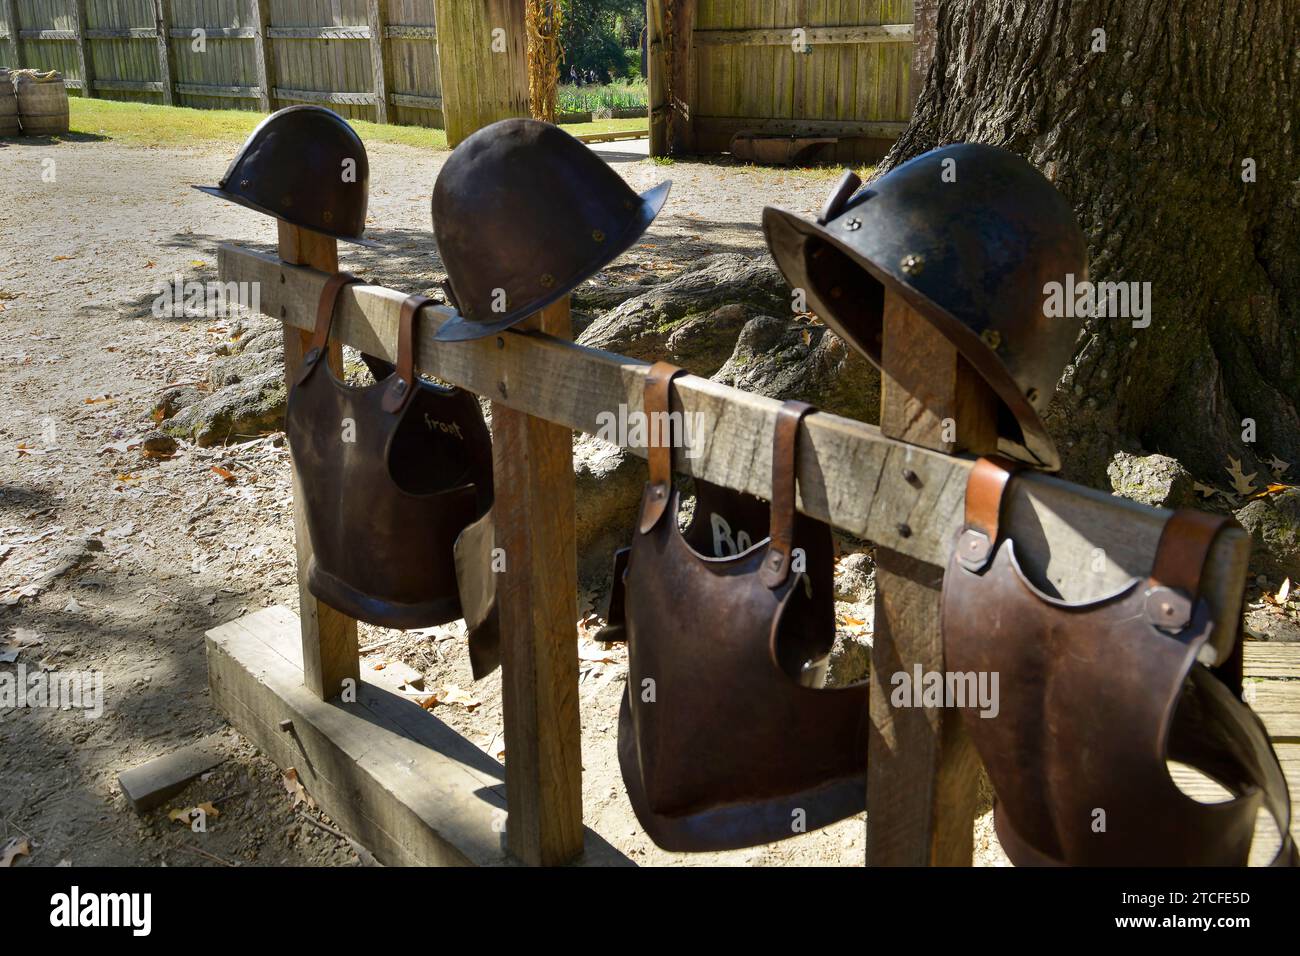 Re-created fort depicting the Virginia Company of London outpost of 1610 at the Living History Museum, Jamestown Settlement, VA Stock Photo